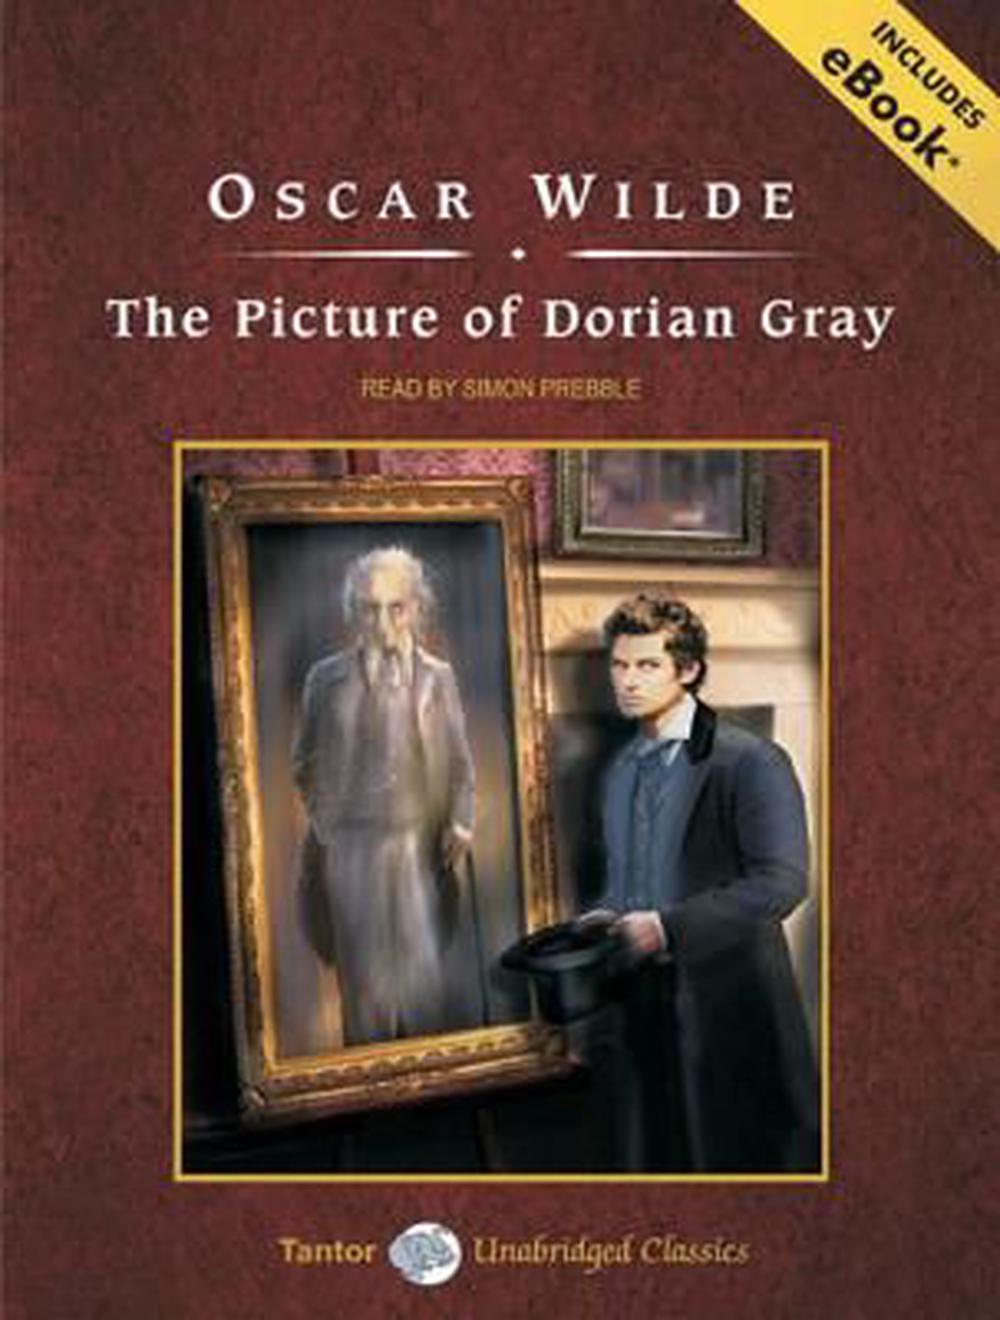 book review the picture of dorian gray